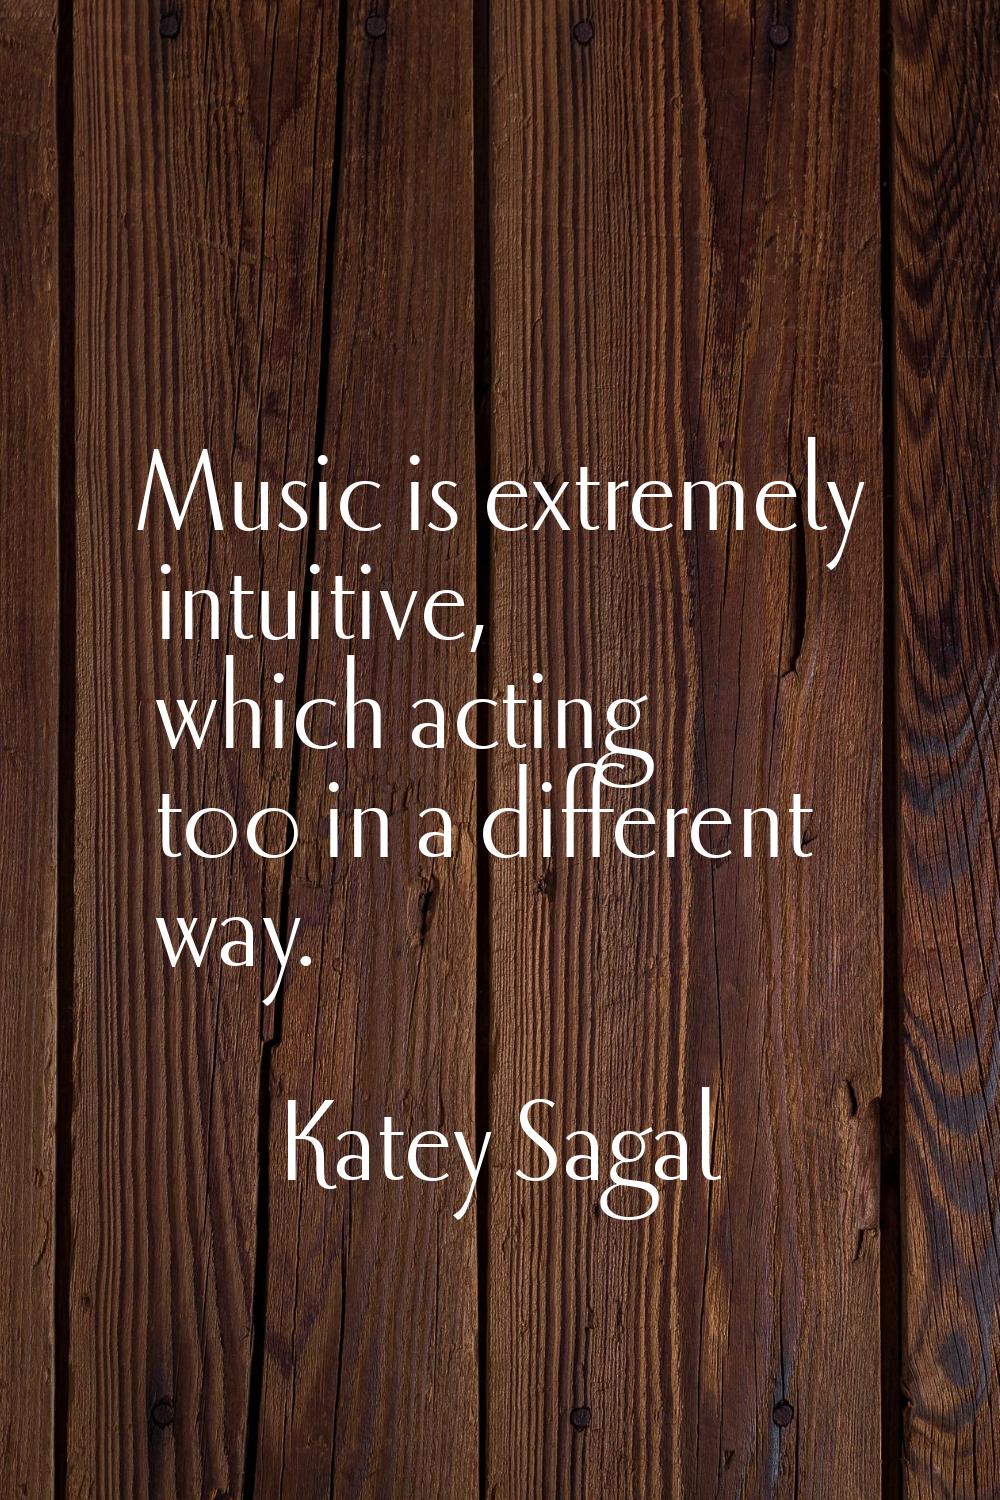 Music is extremely intuitive, which acting too in a different way.